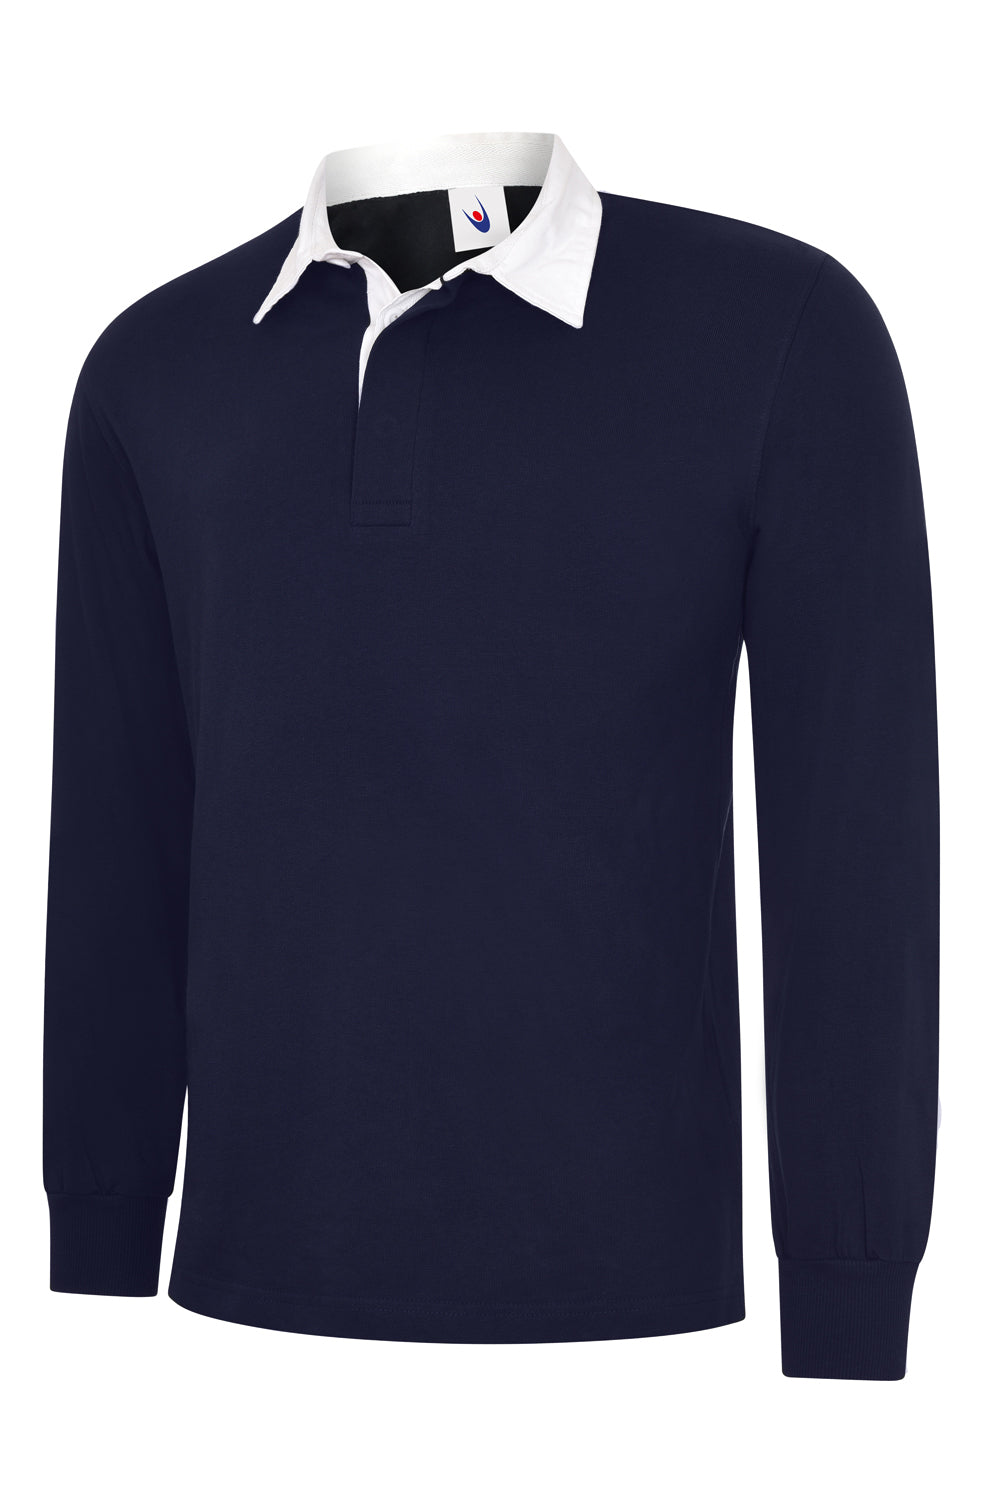 Uneek Classic Rugby Shirt UC402 - Navy